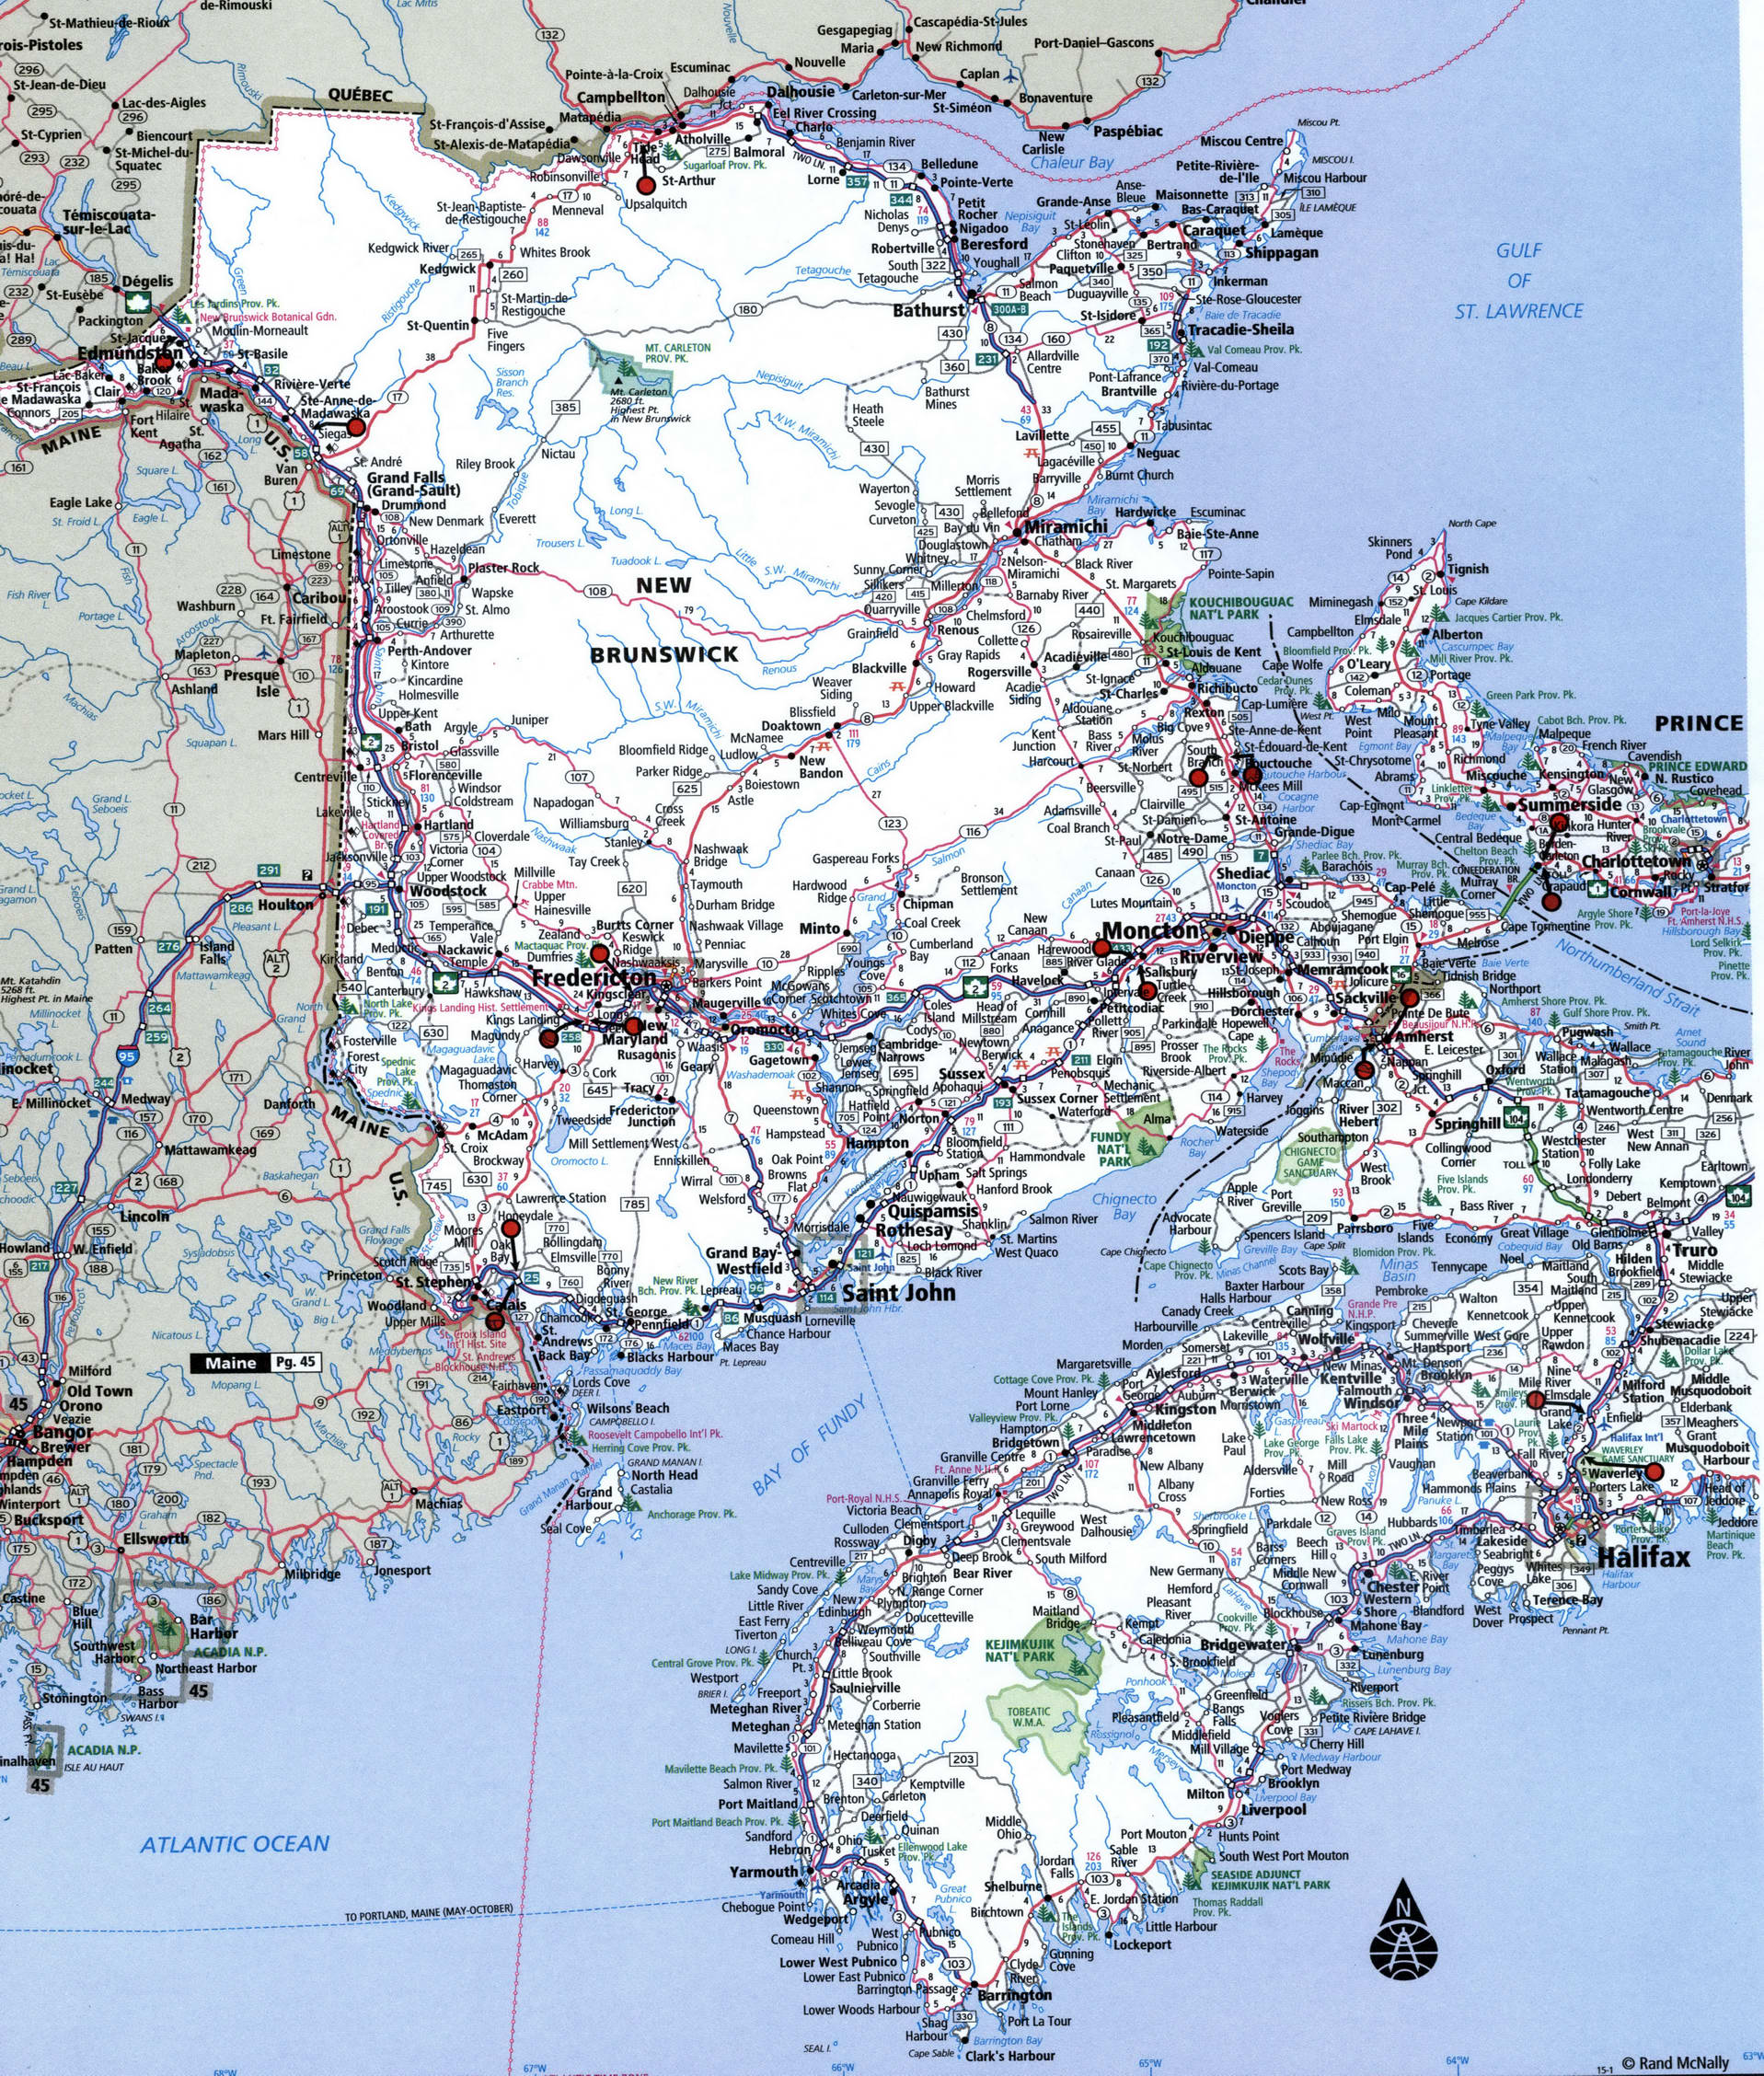 Atlantic provinces road map for truckers